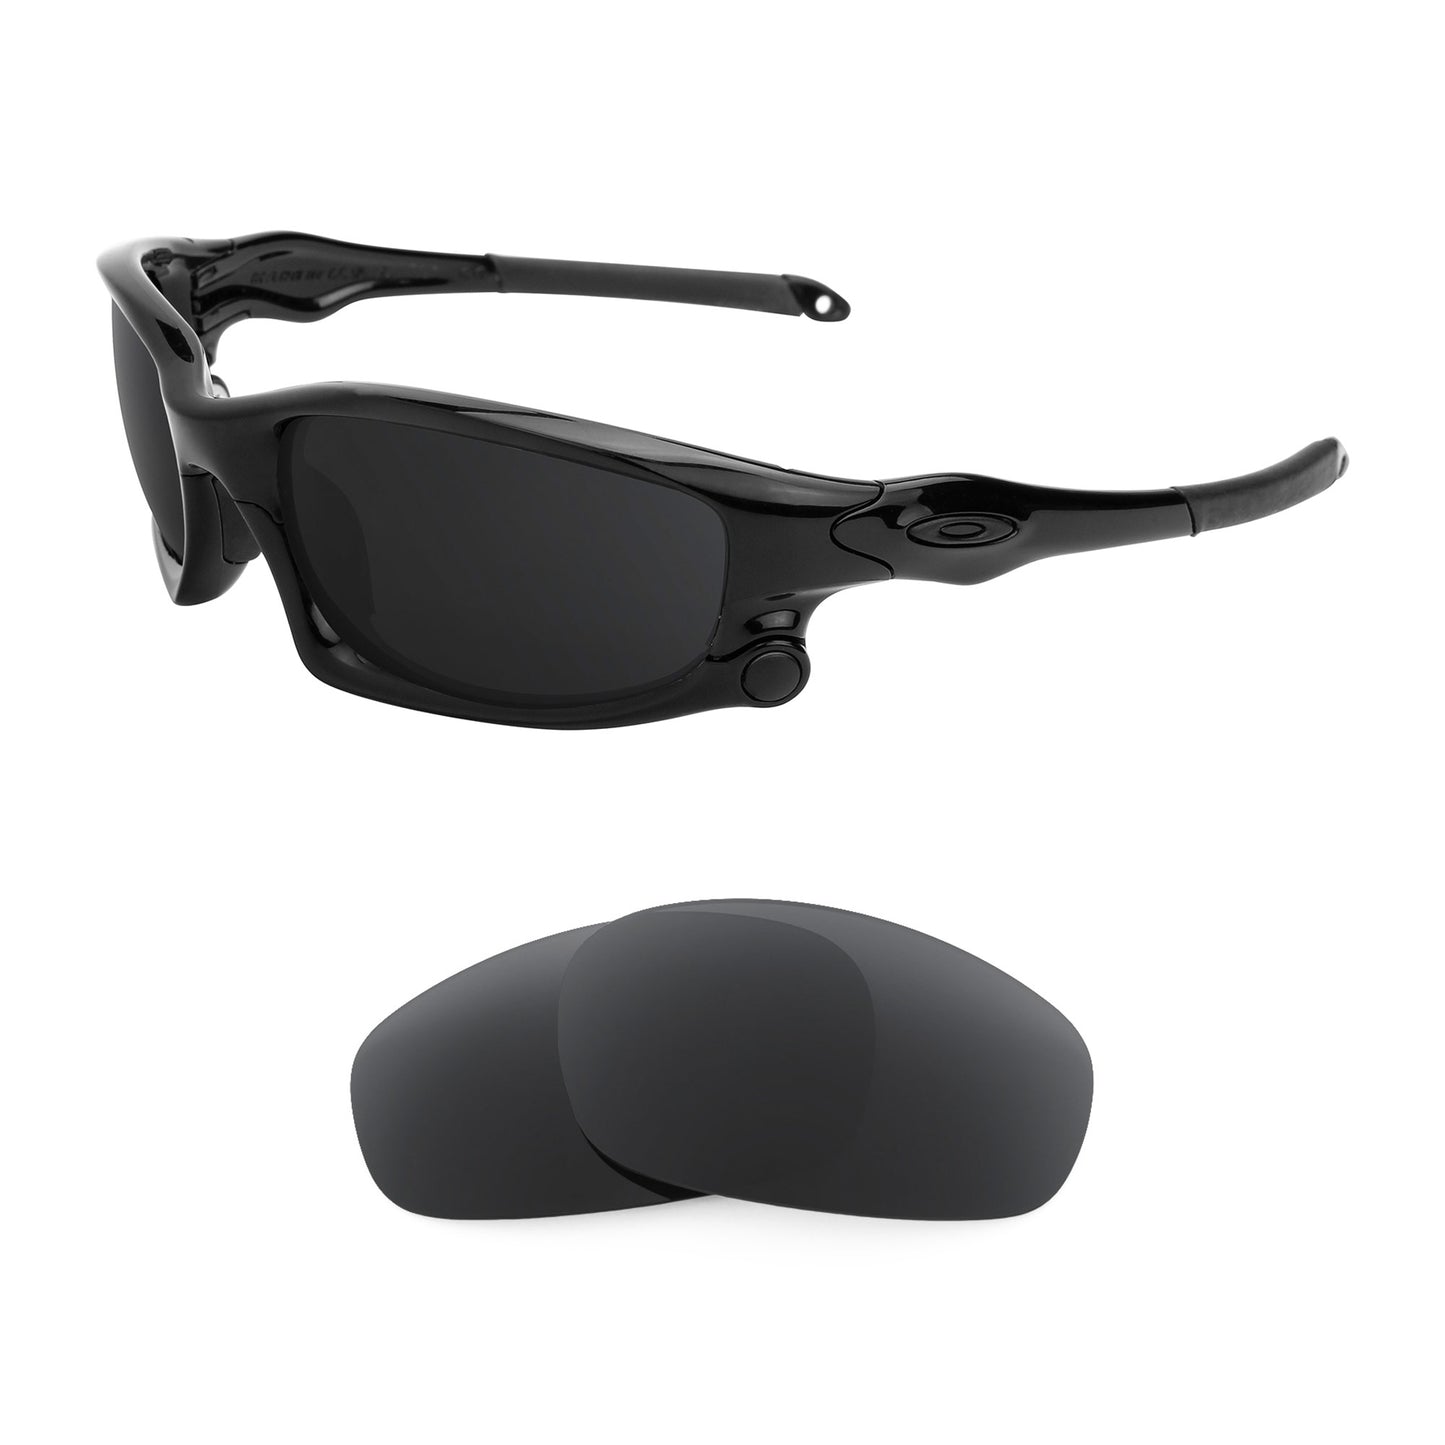 Oakley Wind Jacket (Low Bridge Fit) sunglasses with replacement lenses